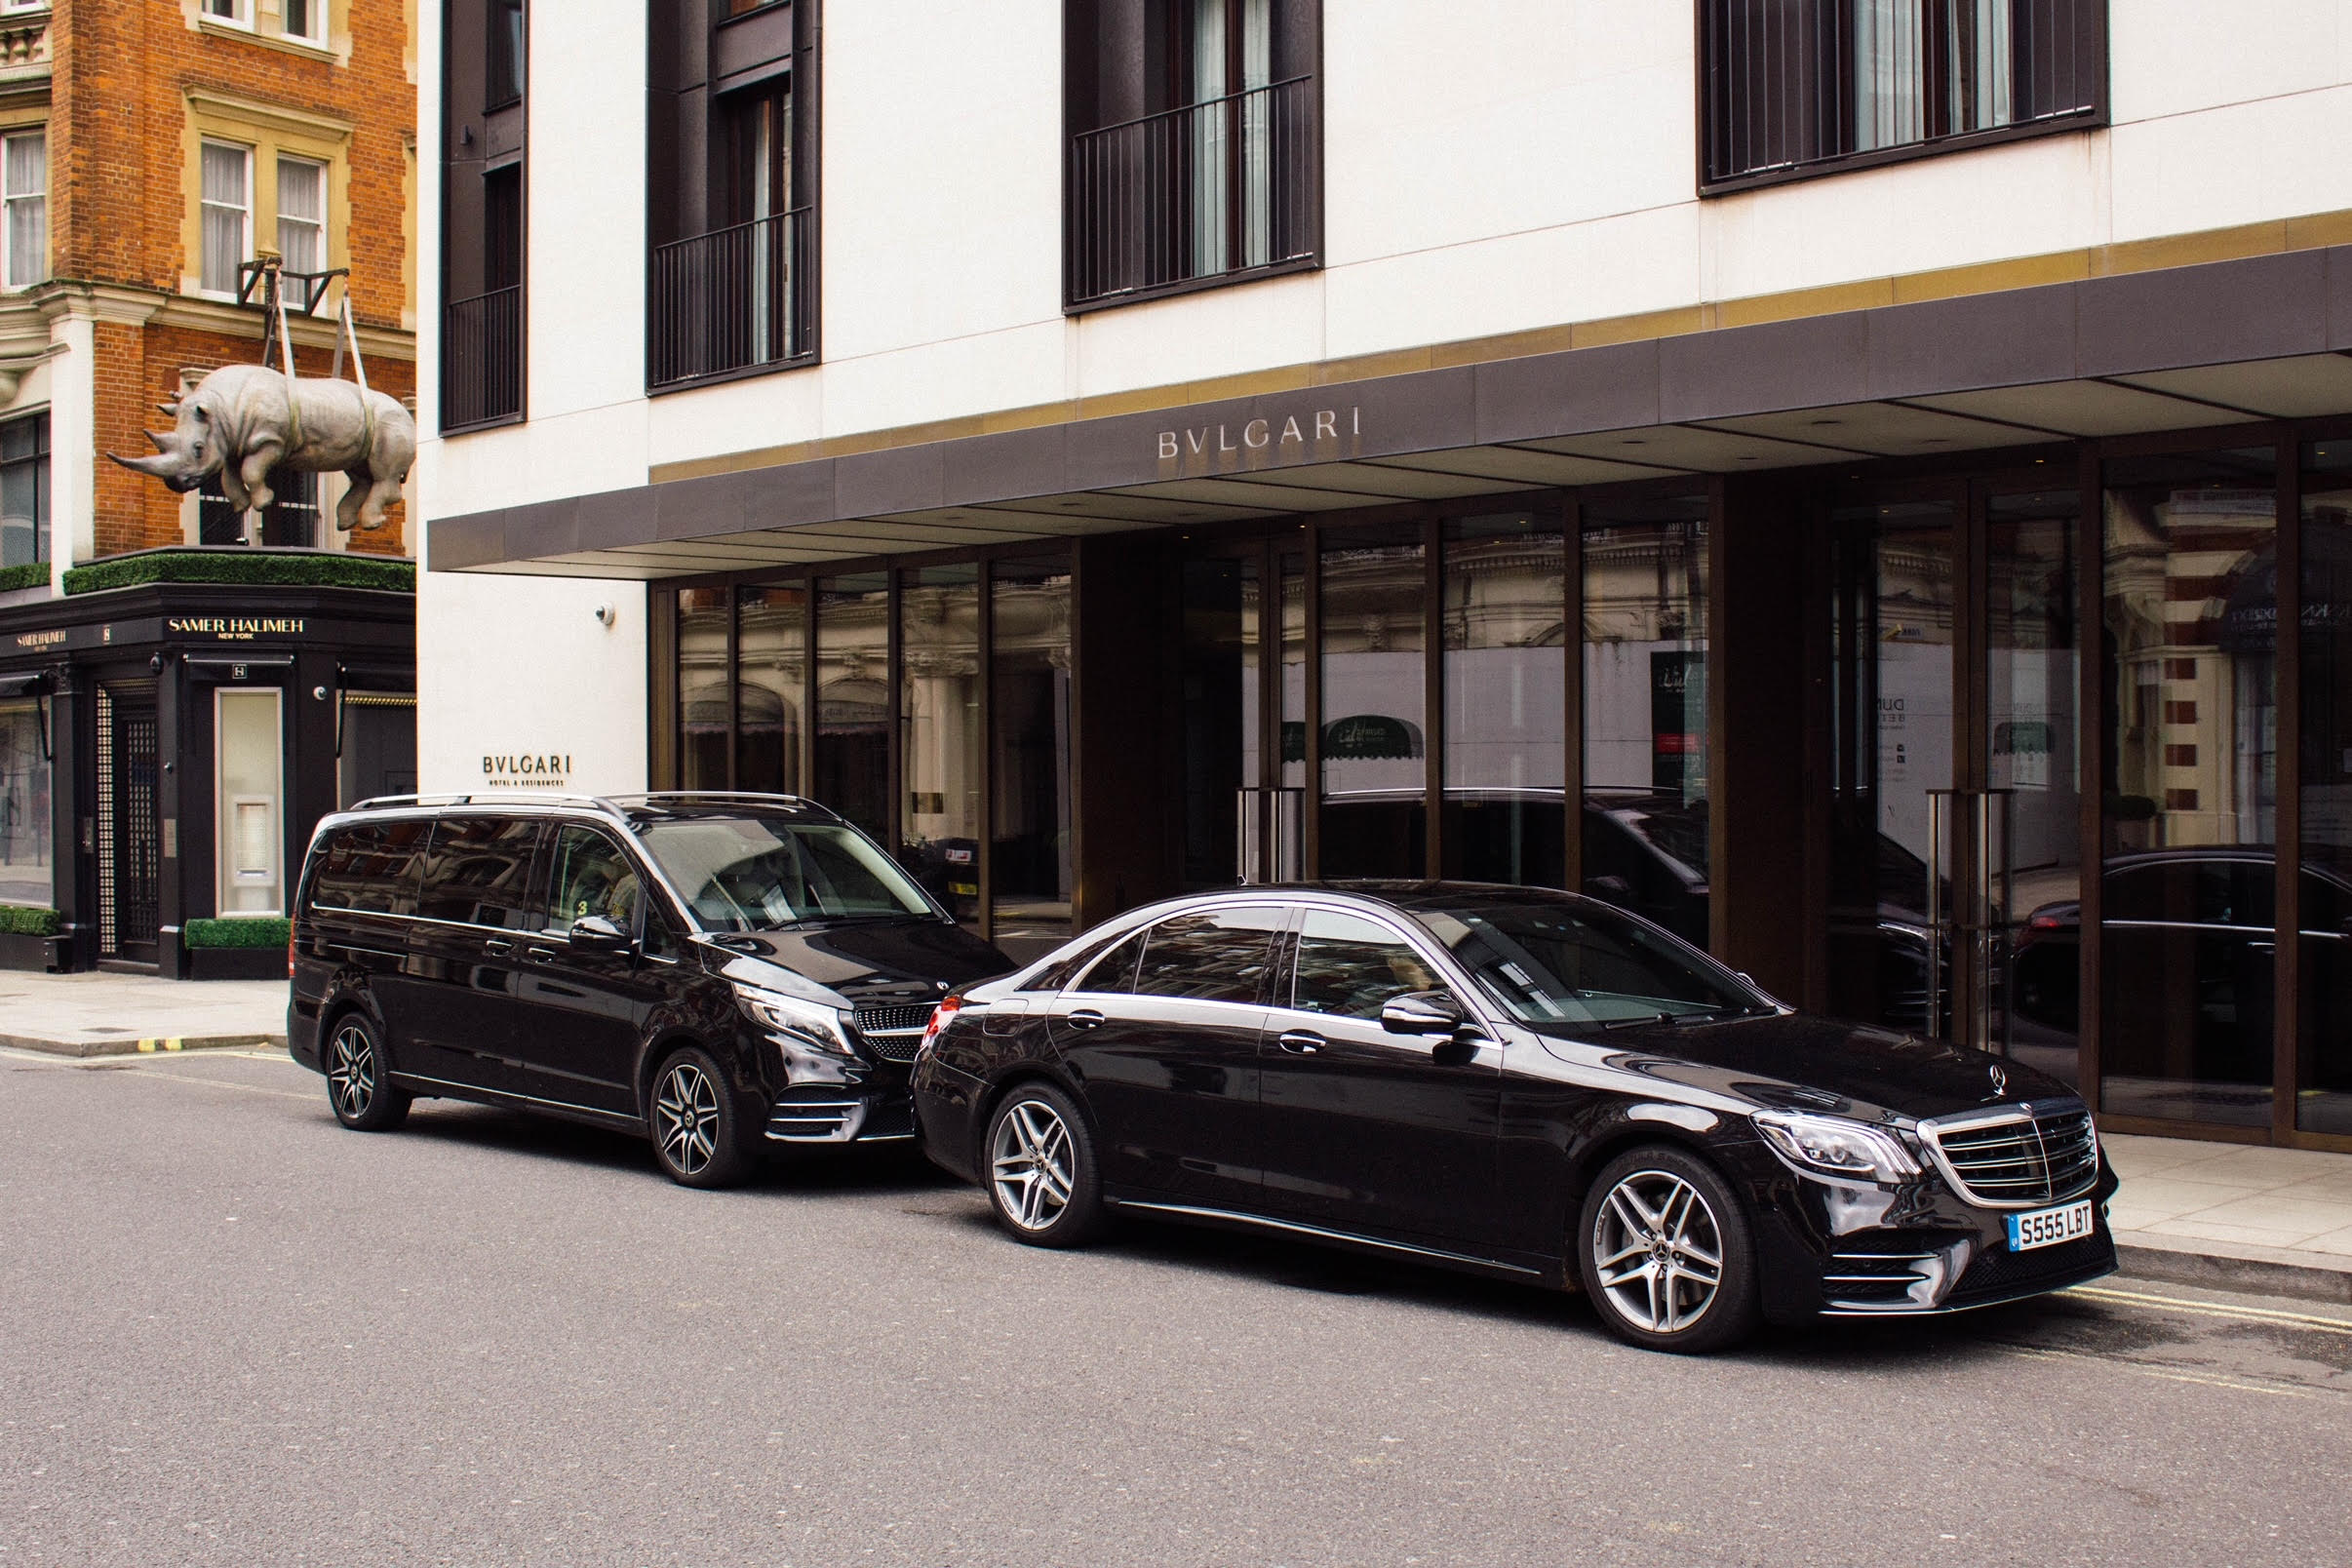 Main image for London Business Travel Ltd - Chauffeur Service in London